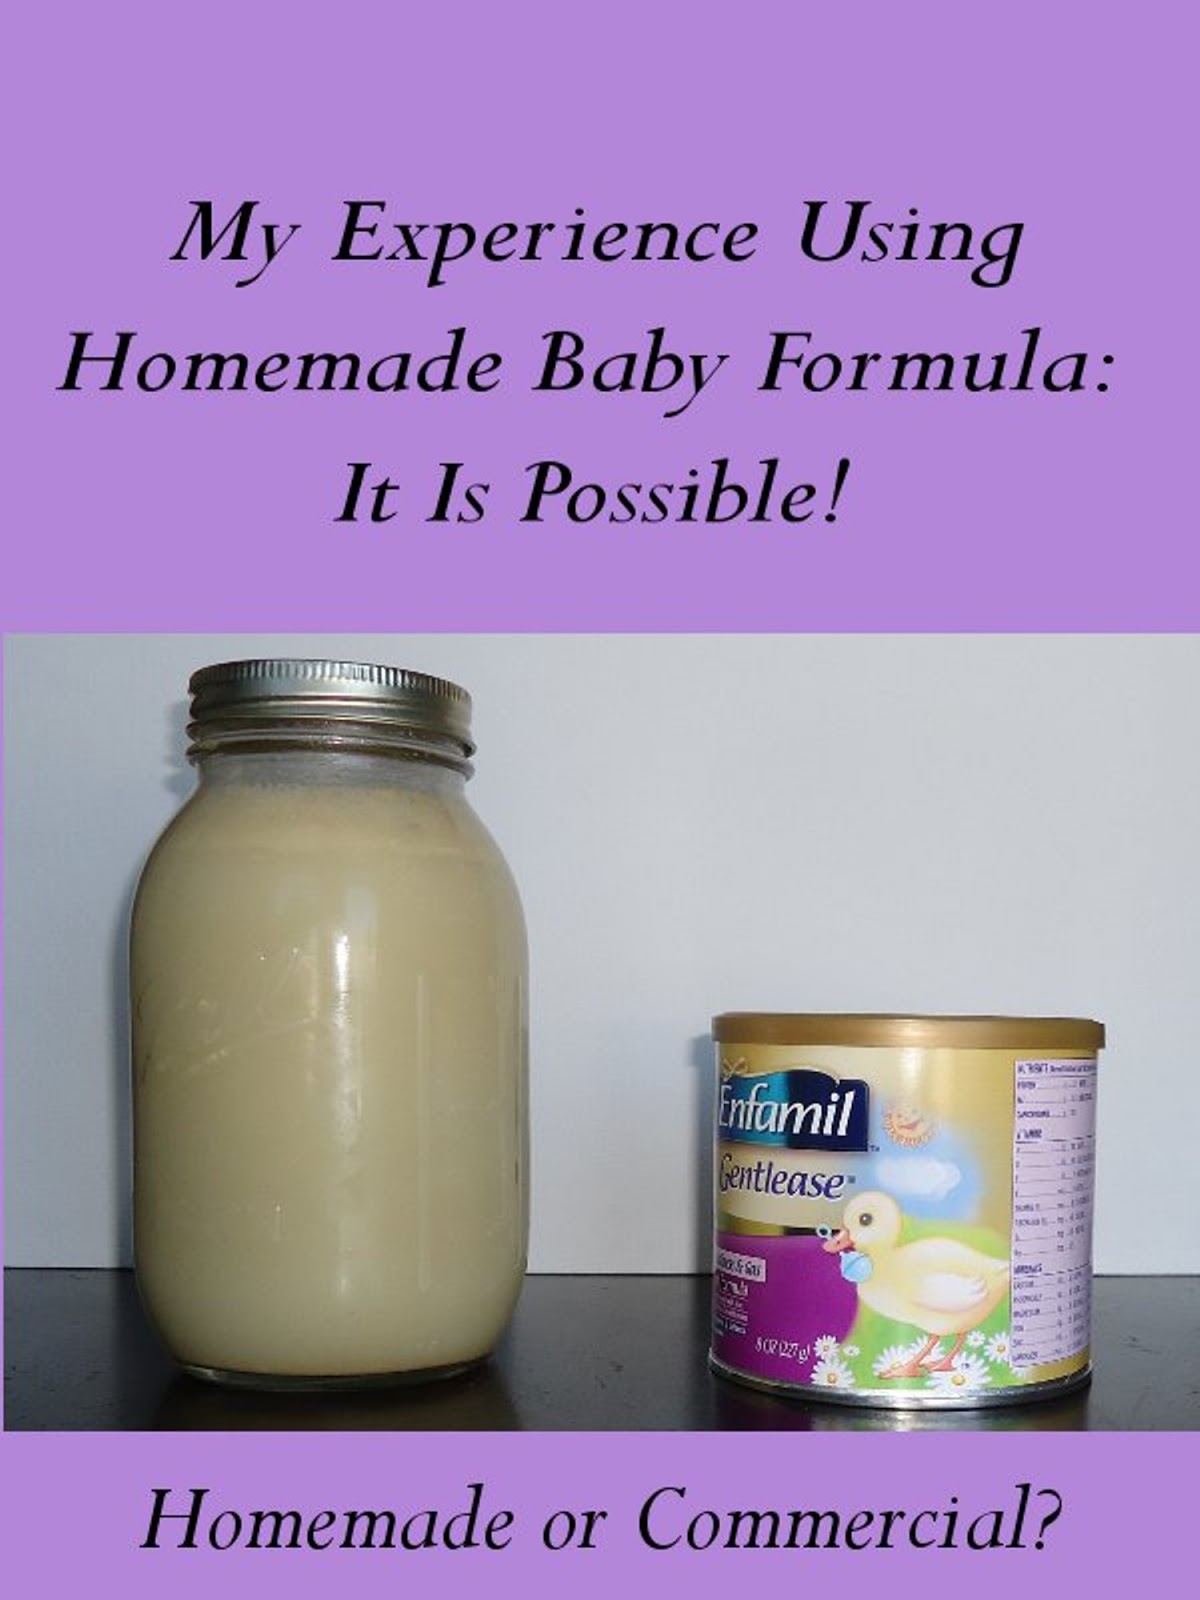 My Experience Using Homemade Baby Formula: It Is Possible!
